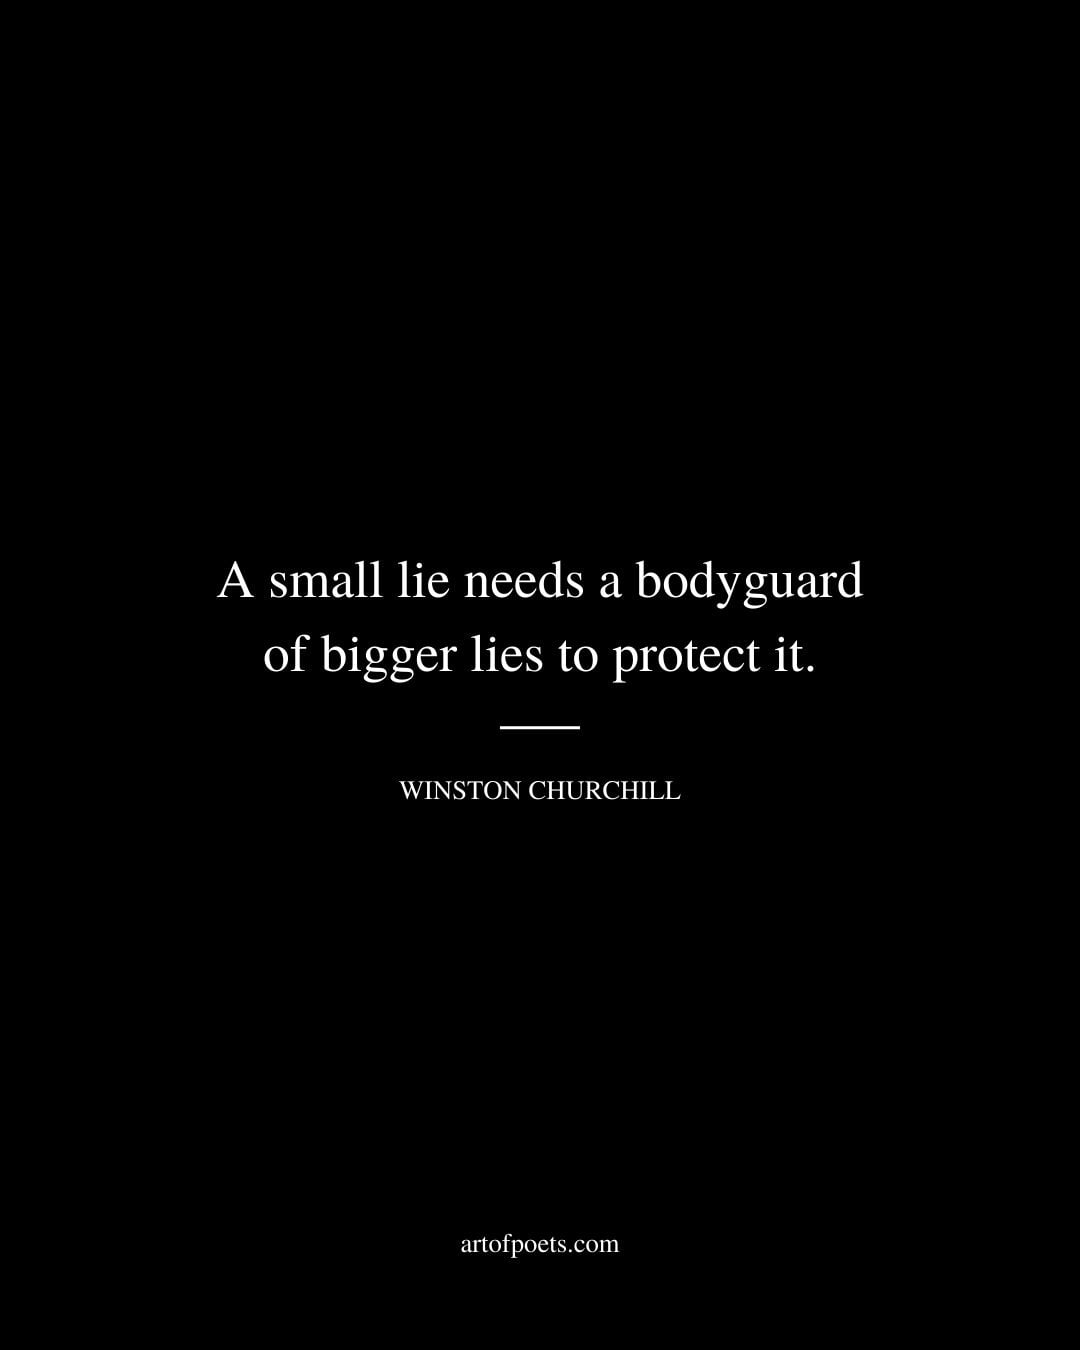 A small lie needs a bodyguard of bigger lies to protect it